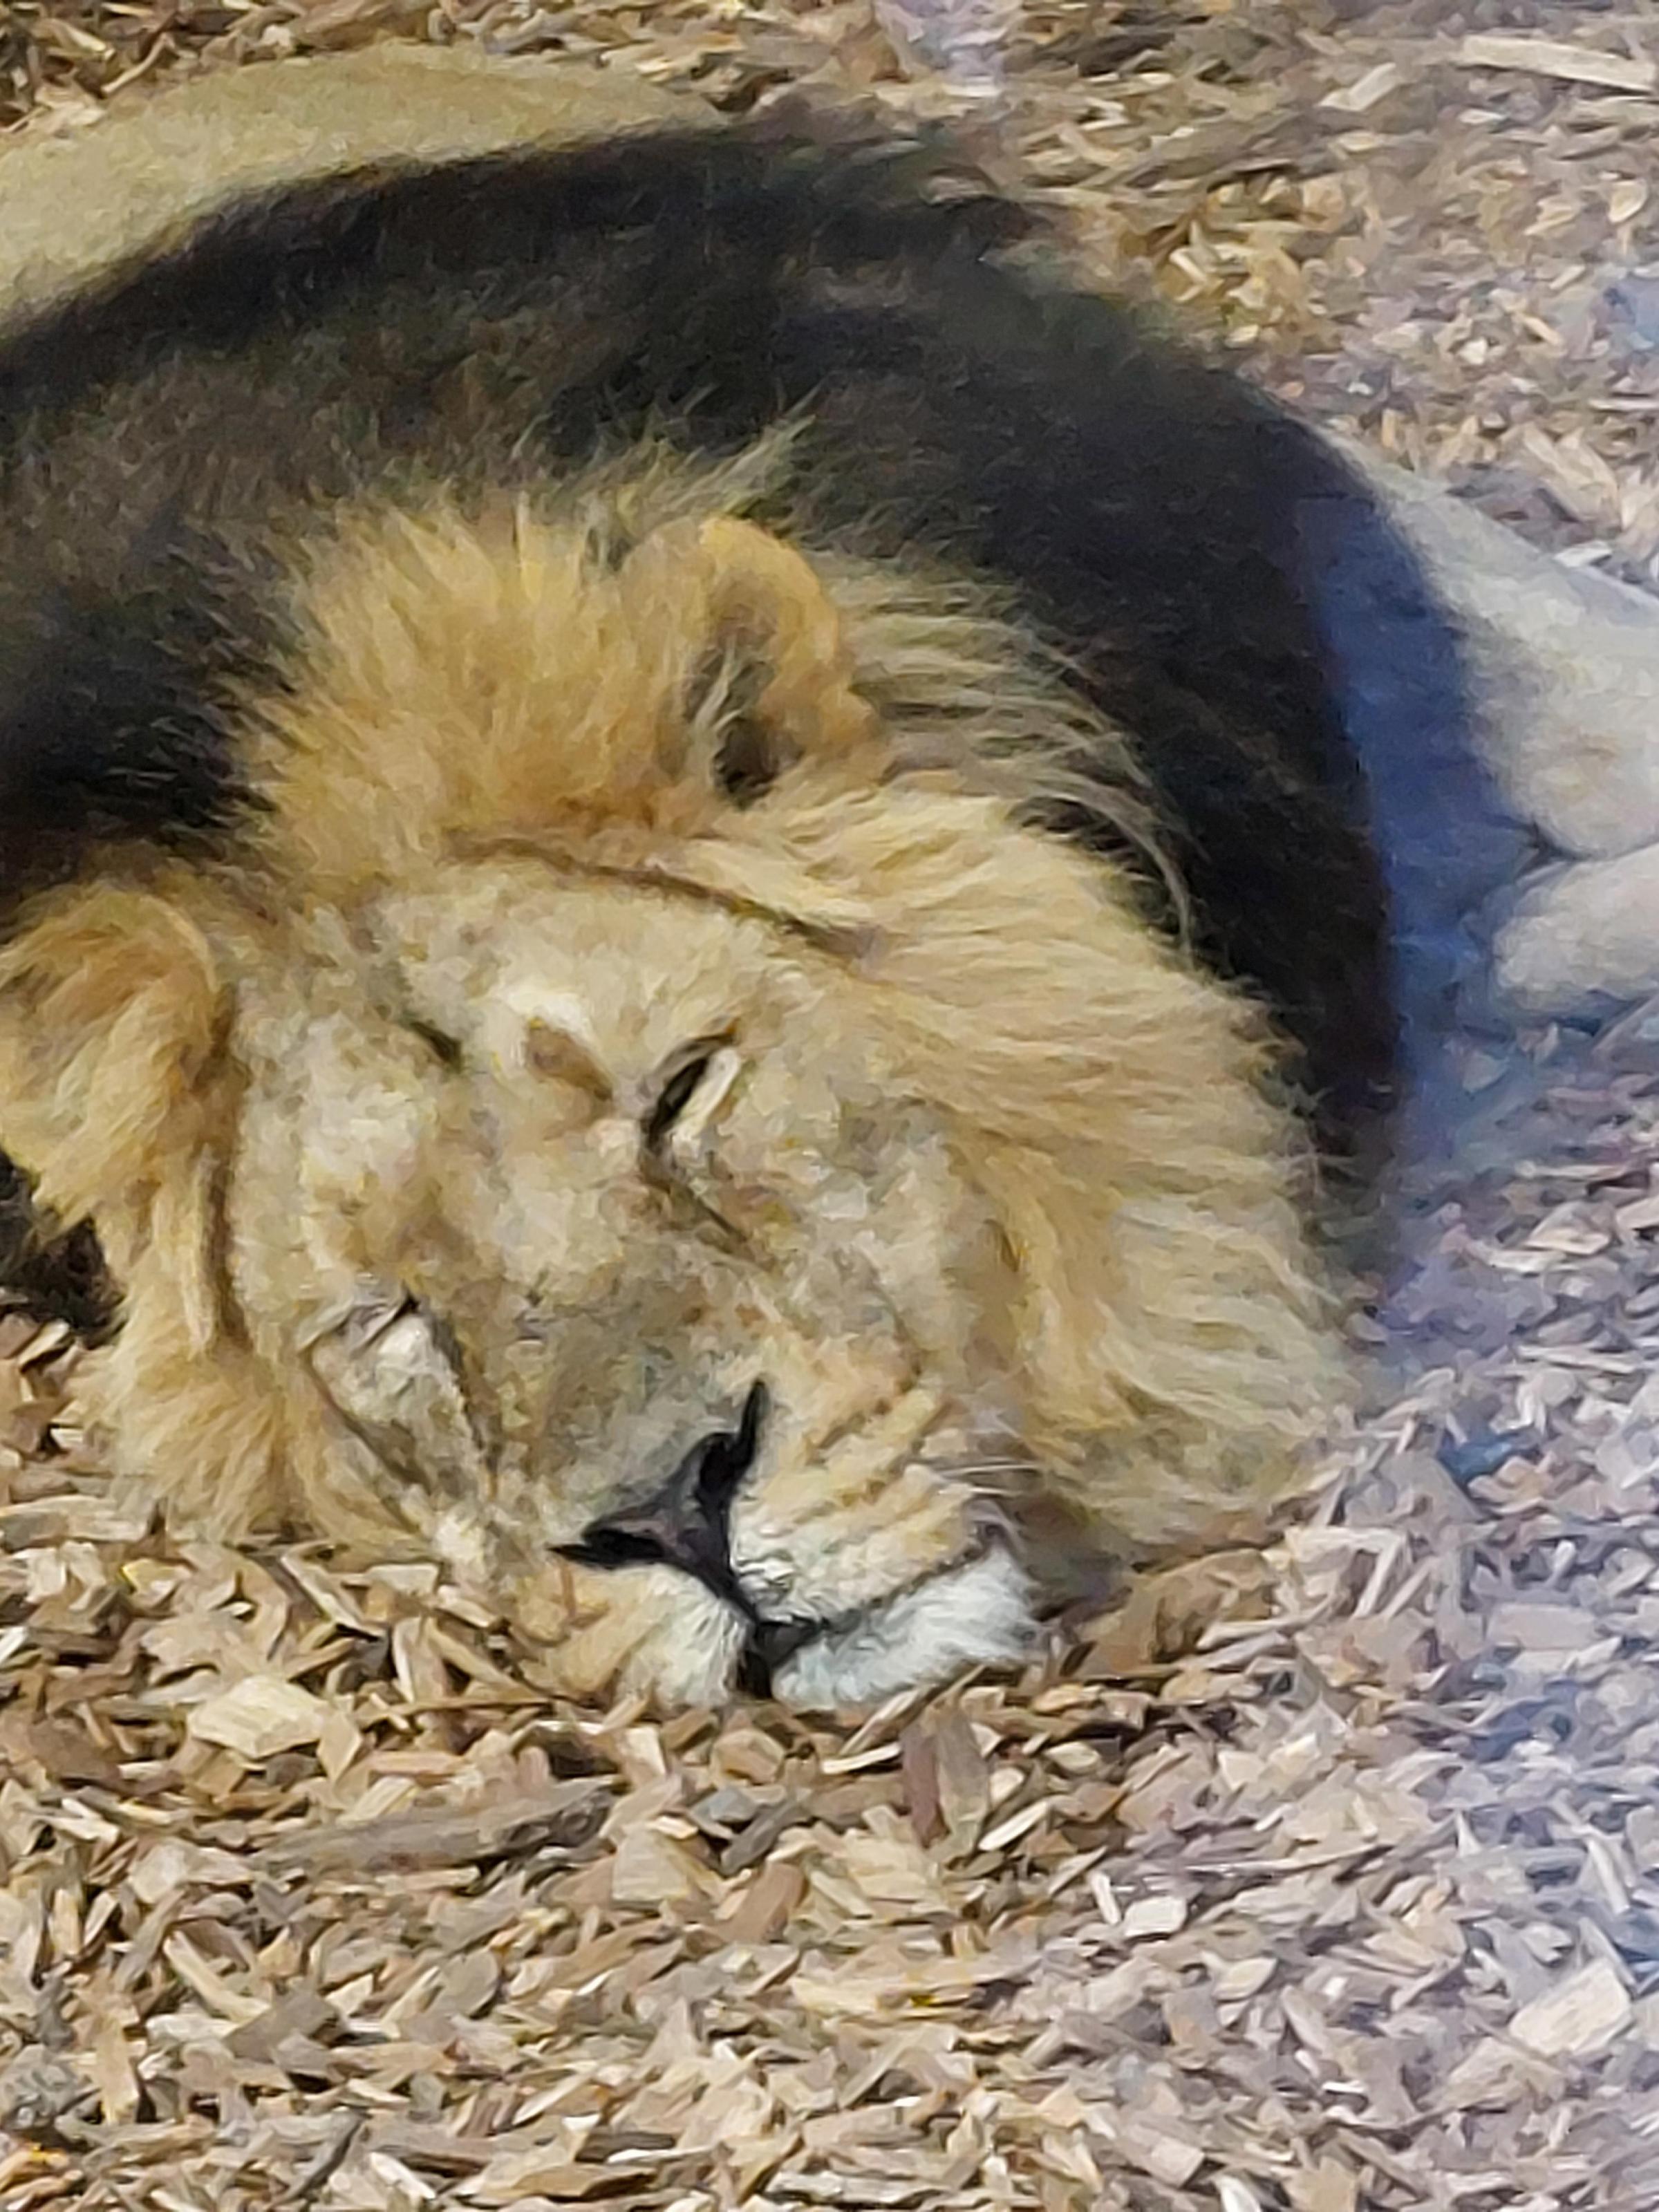 A sleeping lion at Chester Zoo